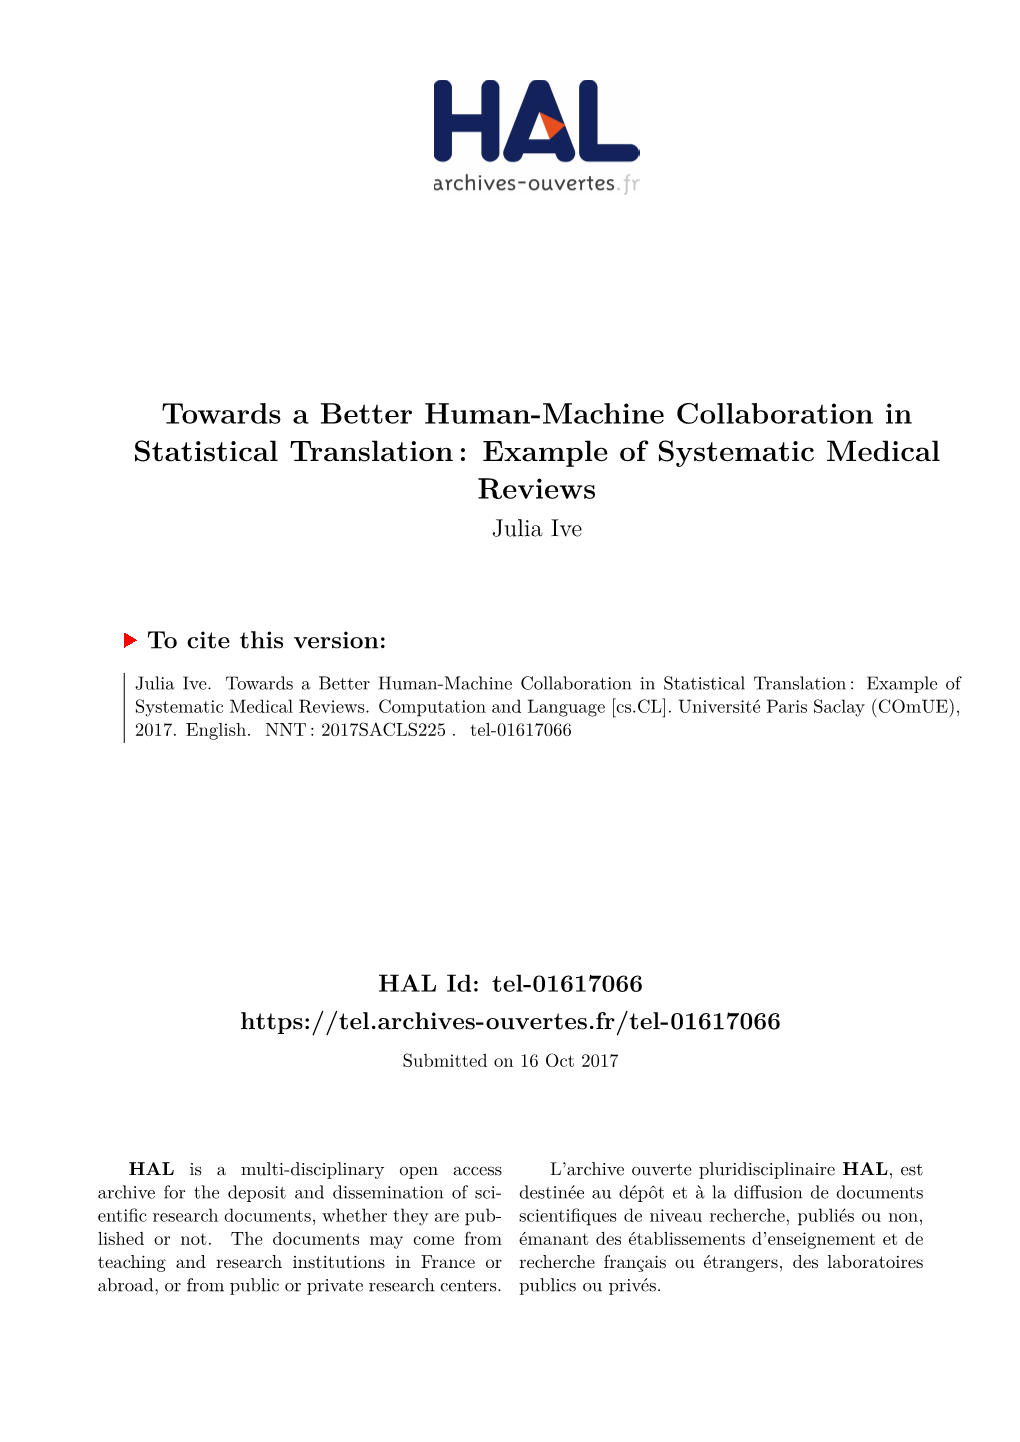 Towards a Better Human-Machine Collaboration in Statistical Translation : Example of Systematic Medical Reviews Julia Ive